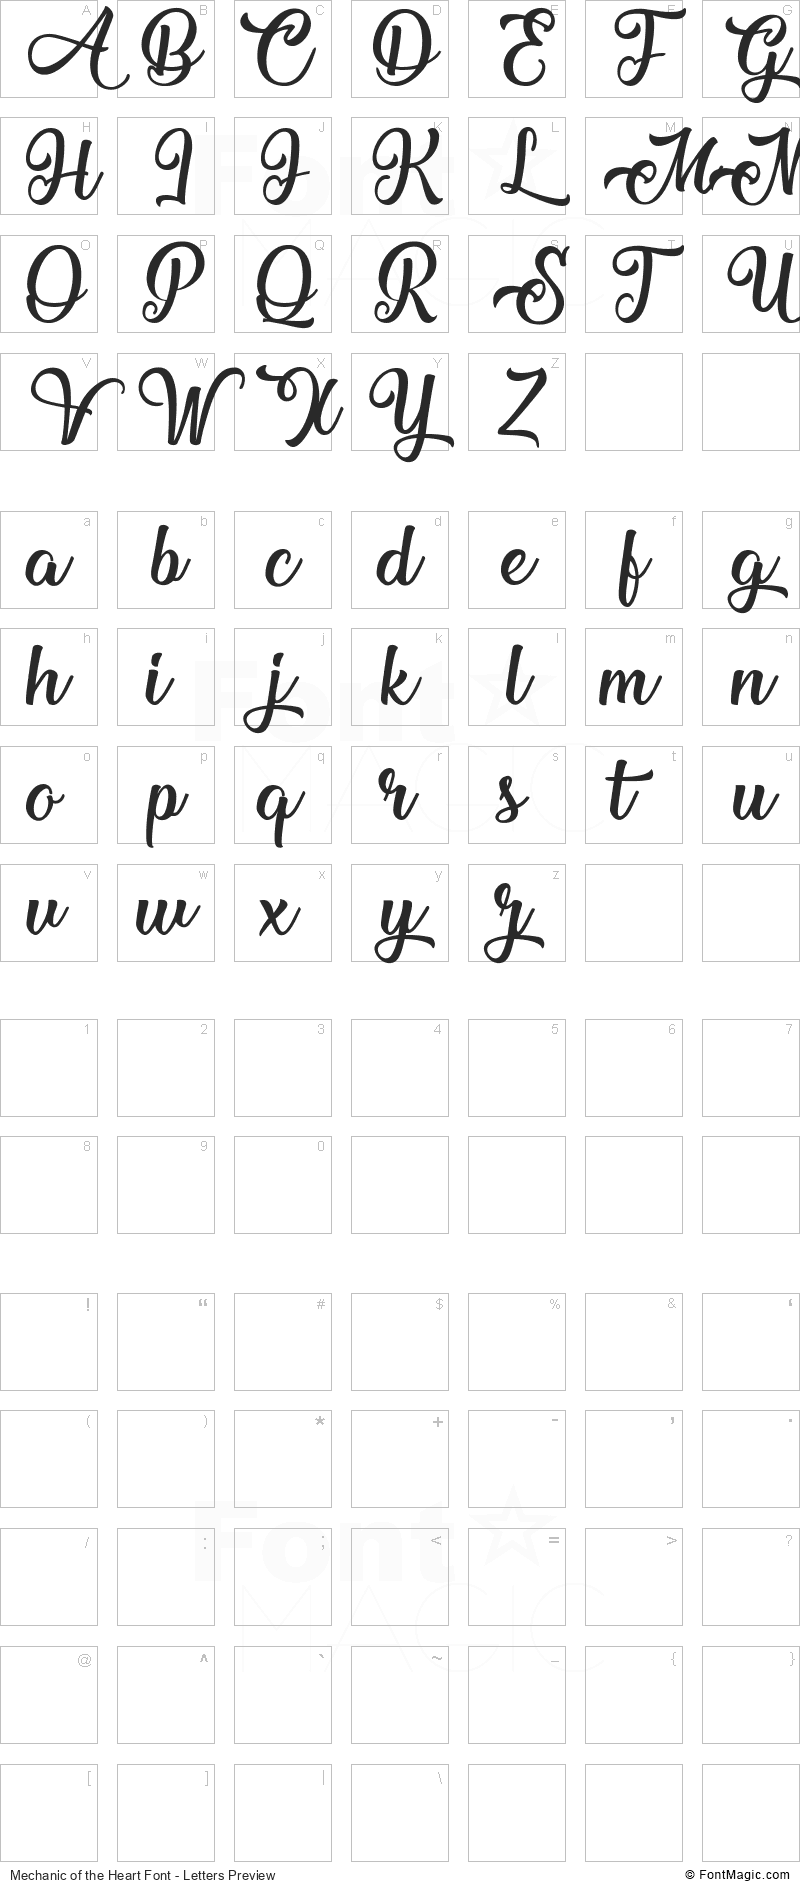 Mechanic of the Heart Font - All Latters Preview Chart